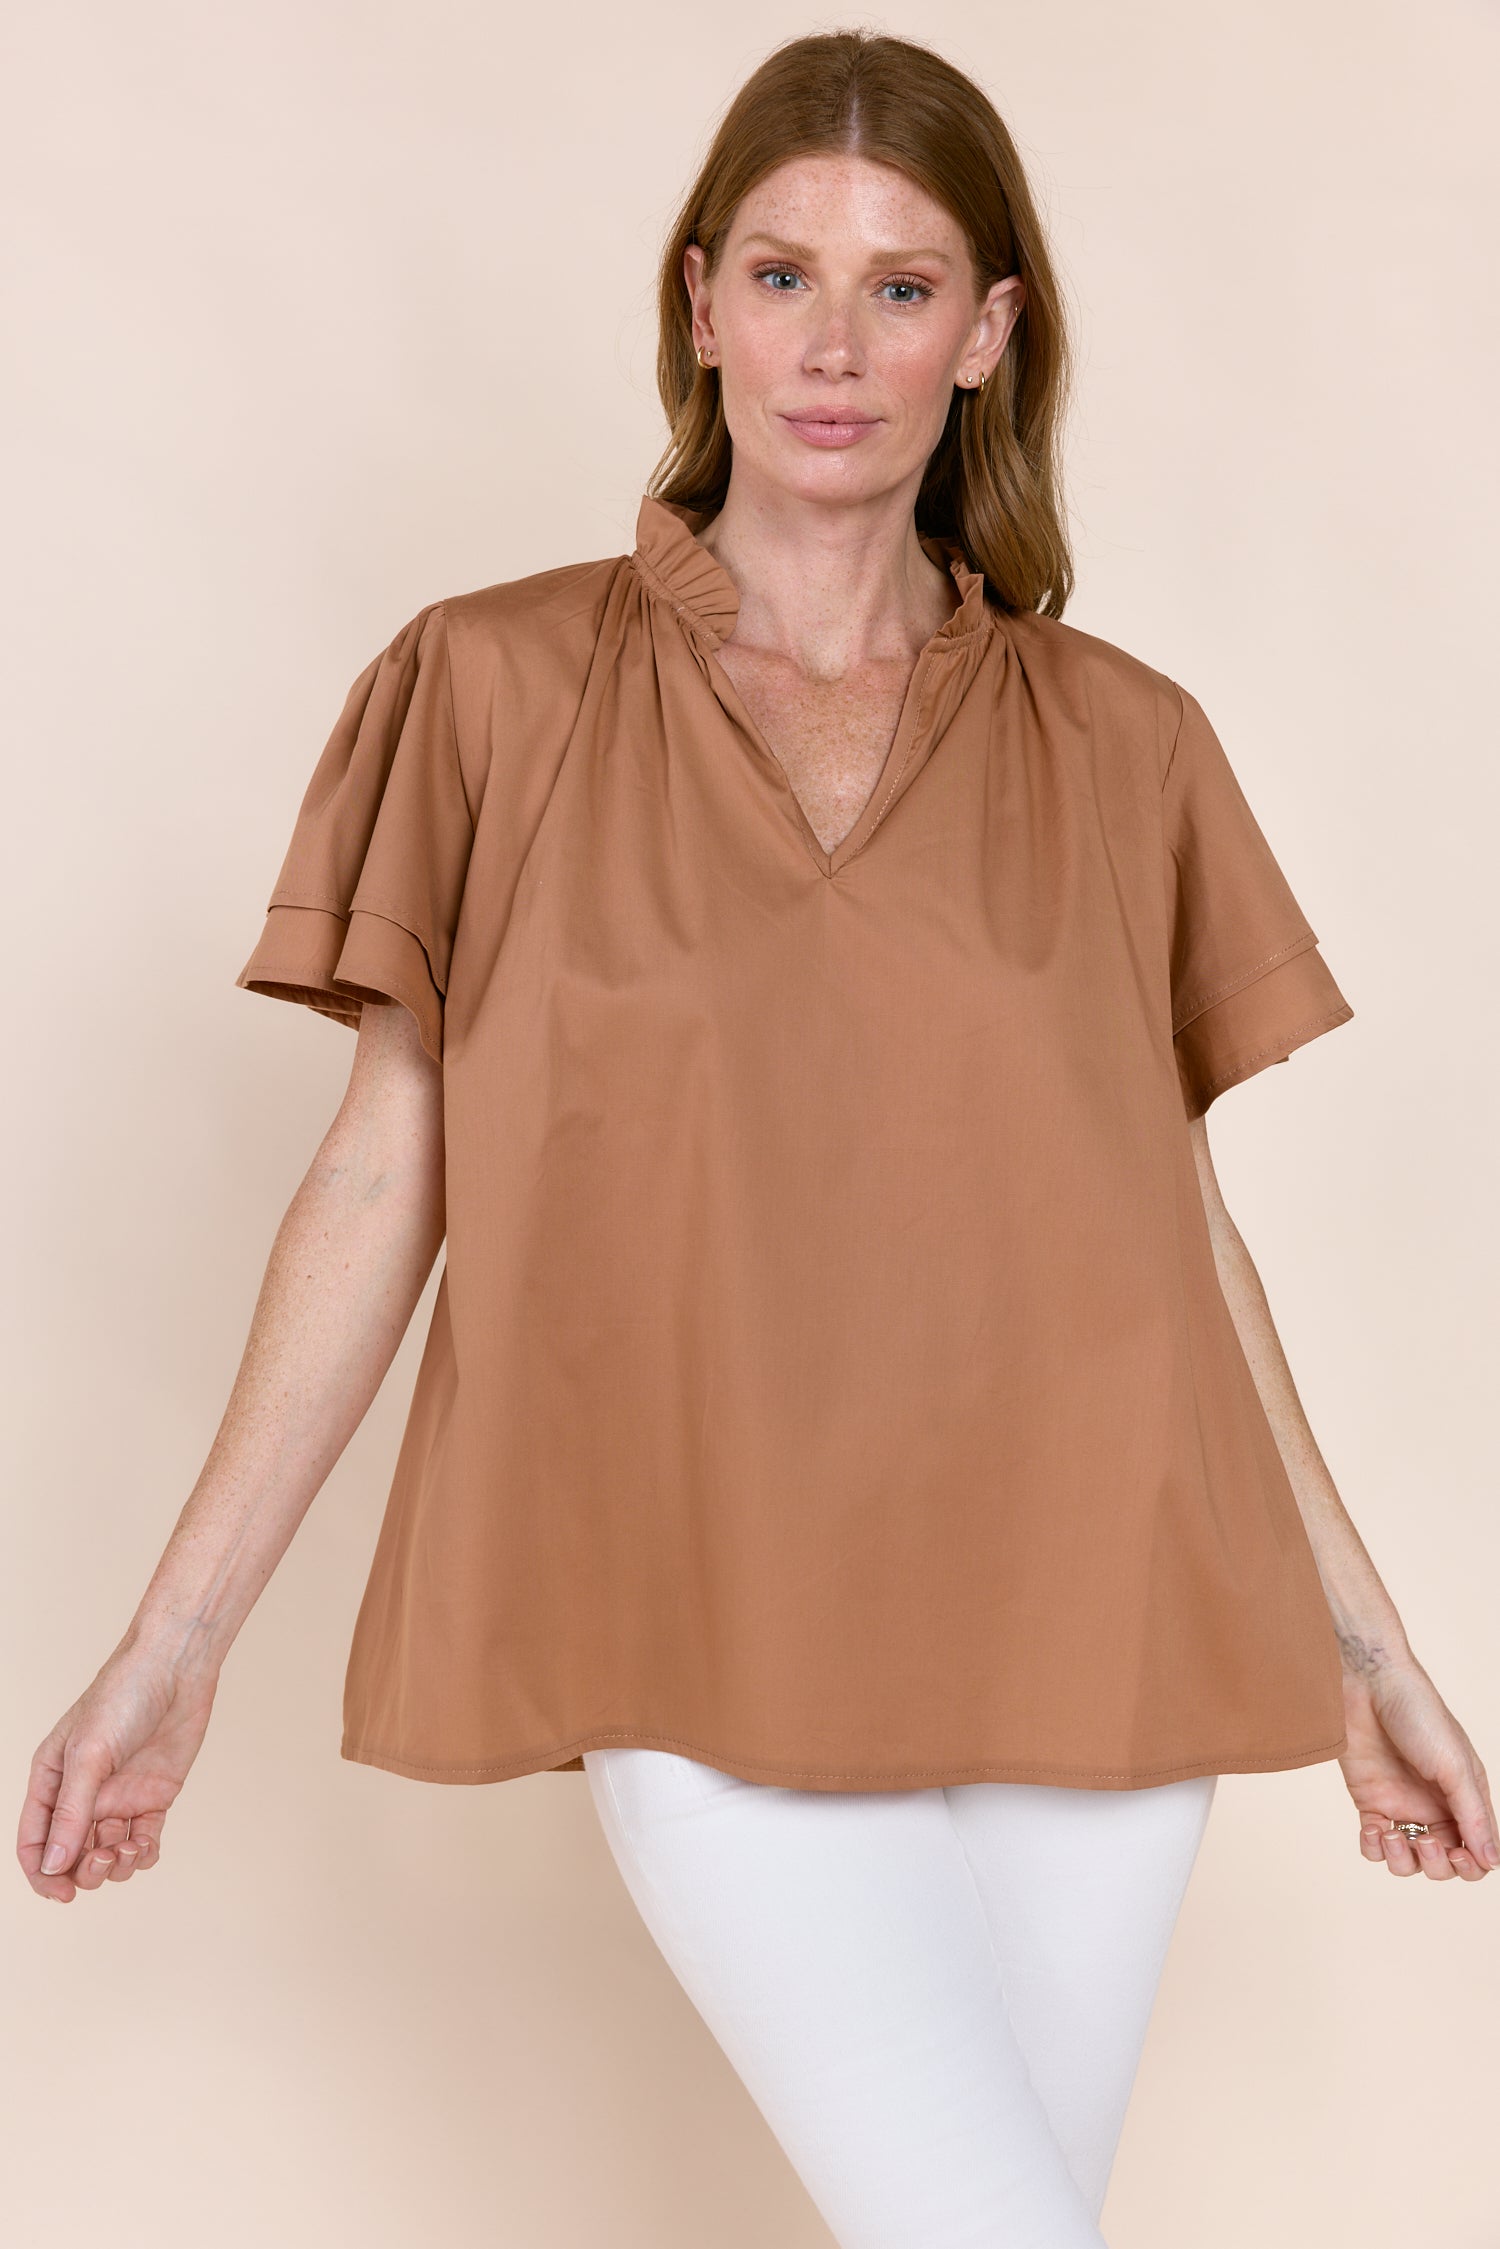 Designer Tops for Women Shop Italian Sofia - Sofia Collection – Tops | Collections